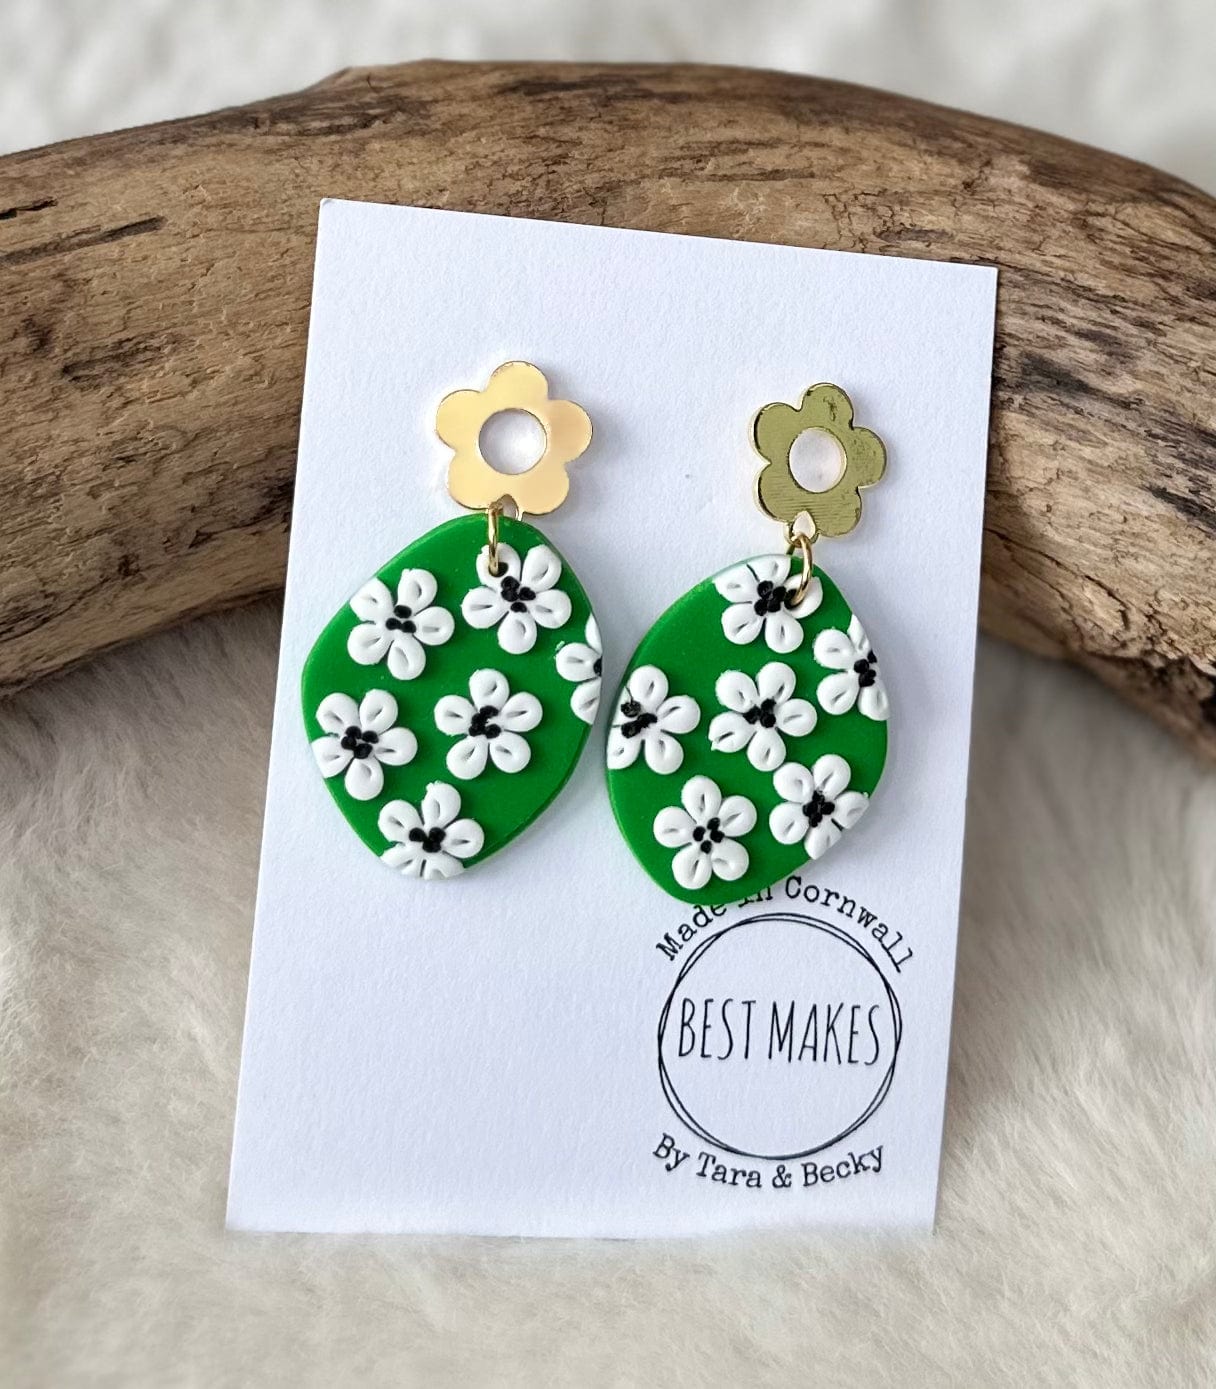 lusciousscarves Green and Gold Dangle Earrings with a White Daisy Design Handmade in Cornwall.